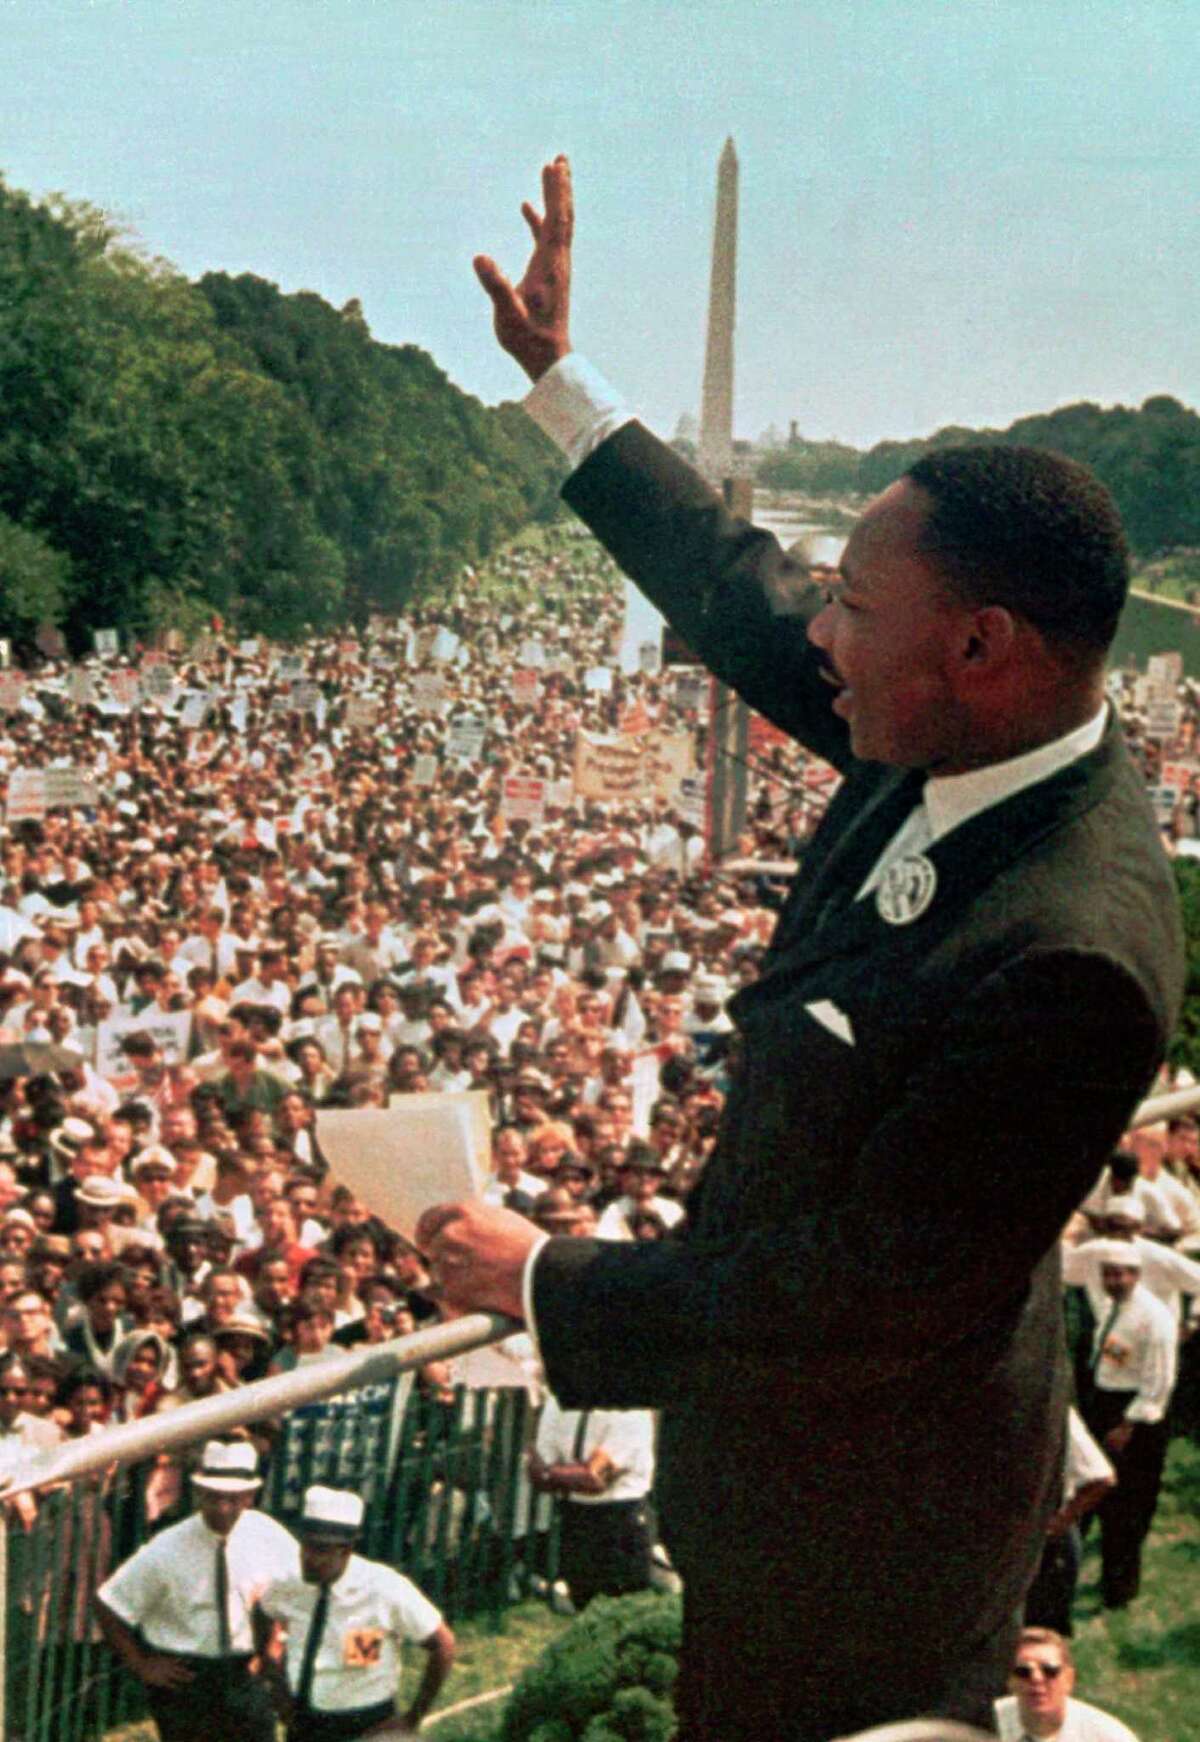 Dr. Martin Luther King Jr. acknowledging the crowd at the Lincoln Memorial for his "I Have a Dream" speech in 1963. King’s vision continues to transcend divisions and time. There will be no march this year, but much to celebrate and more work to do as we bend the arc of the moral universe.